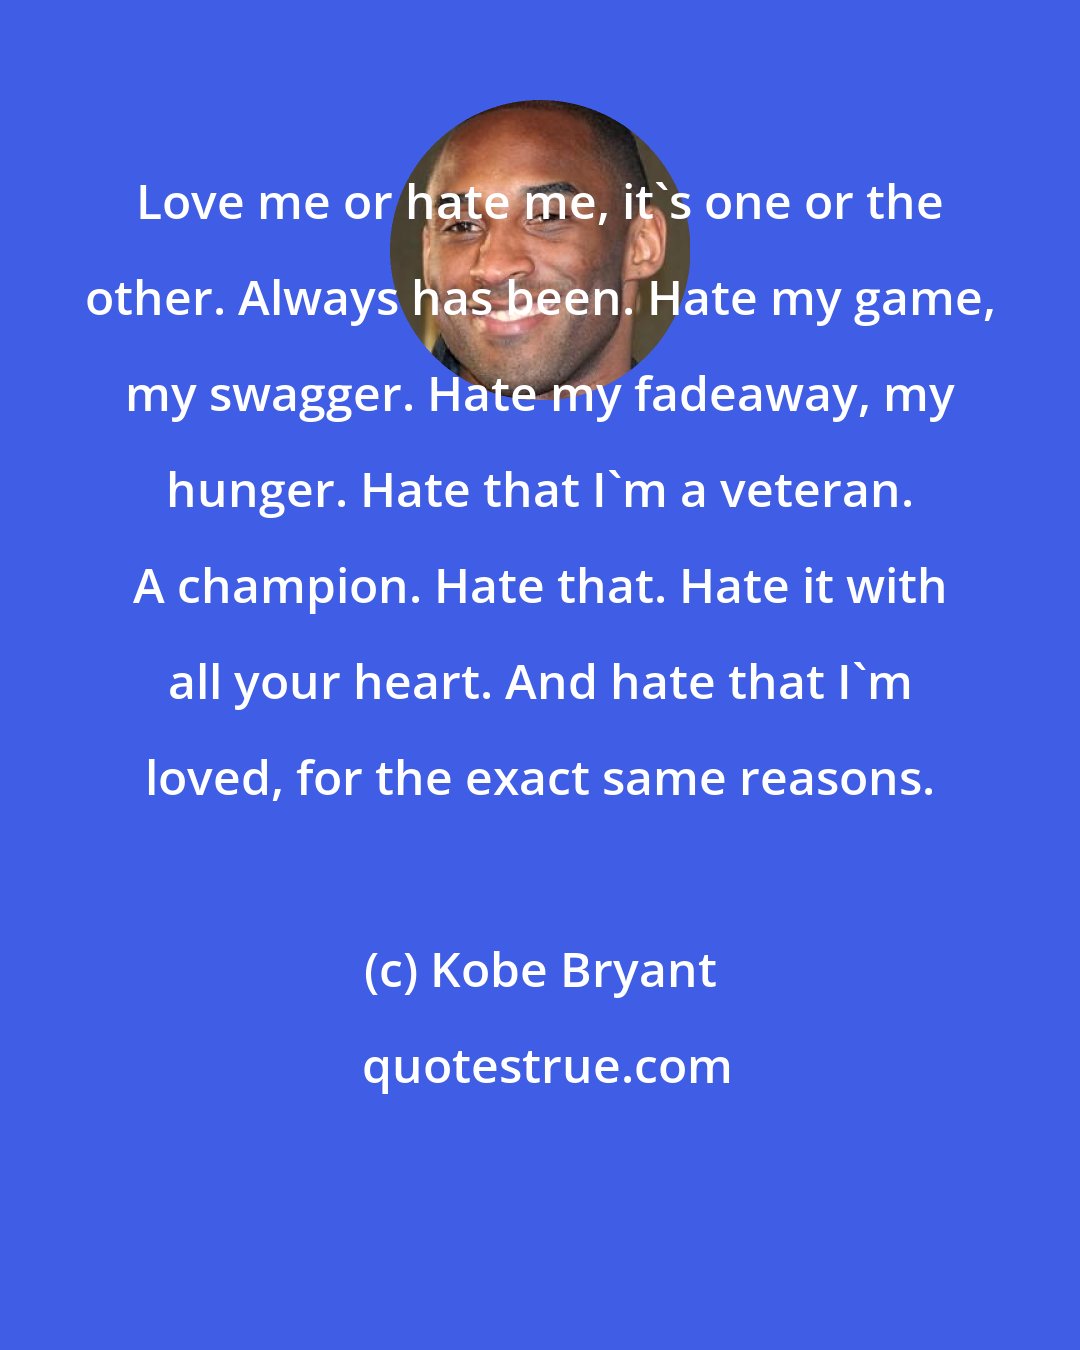 Kobe Bryant: Love me or hate me, it's one or the other. Always has been. Hate my game, my swagger. Hate my fadeaway, my hunger. Hate that I'm a veteran. A champion. Hate that. Hate it with all your heart. And hate that I'm loved, for the exact same reasons.